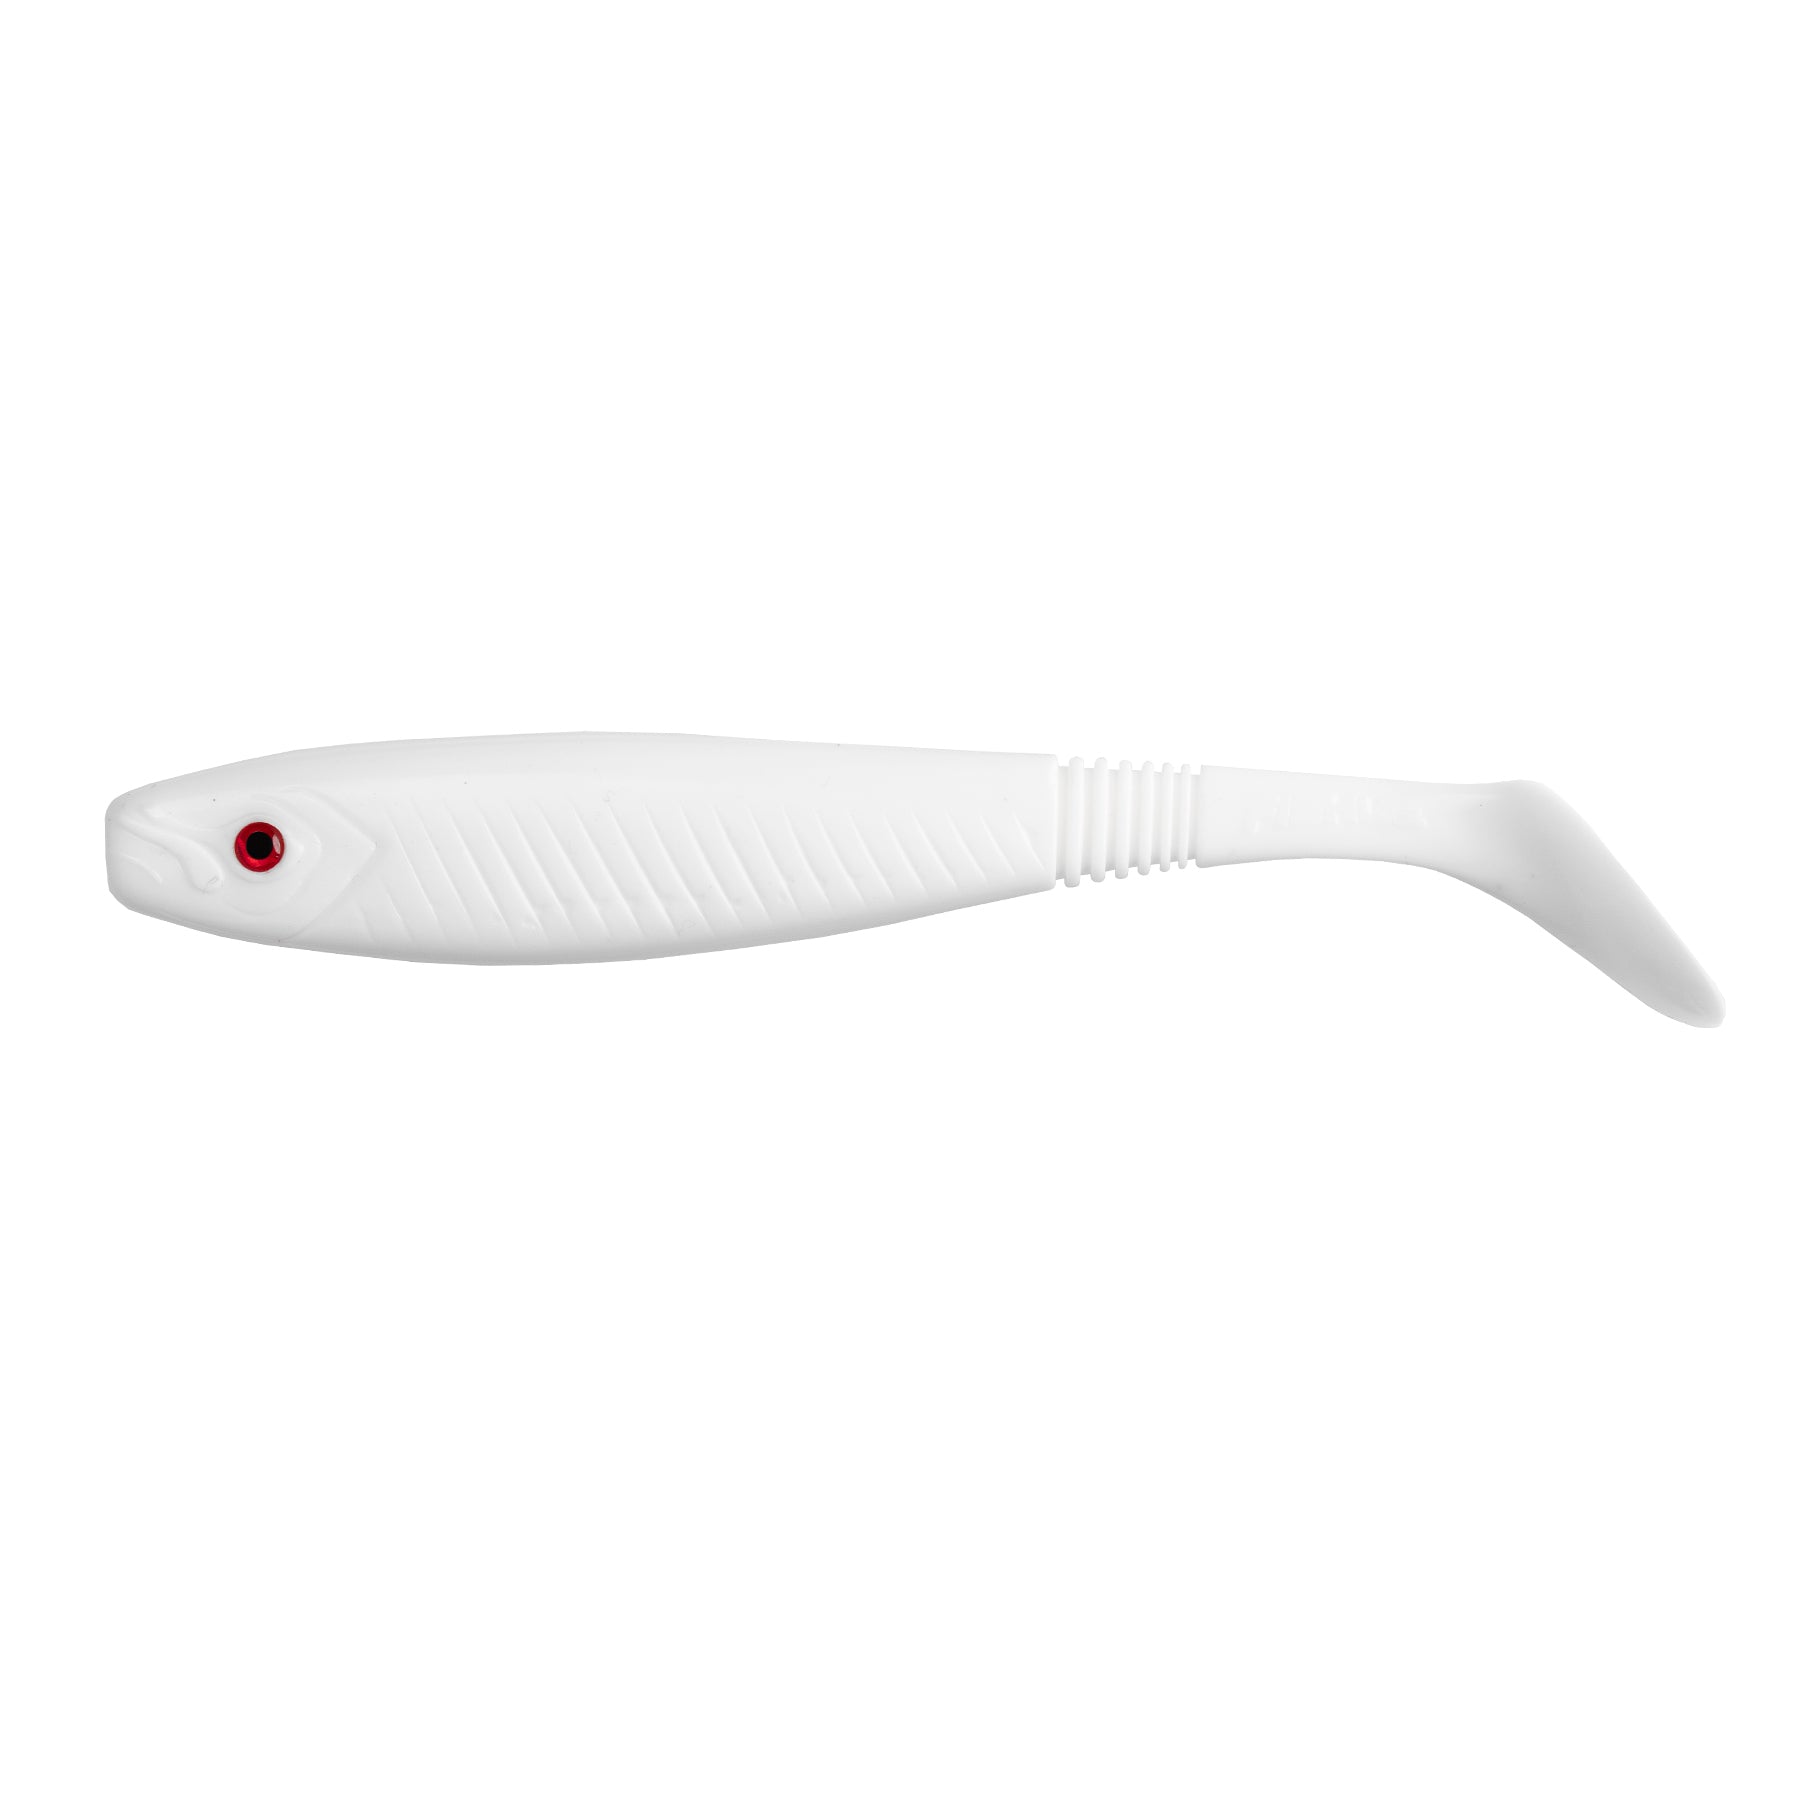 Fishus Espetit Fat Shad Fishing Lures - Soft swimbait for pike and Bass.